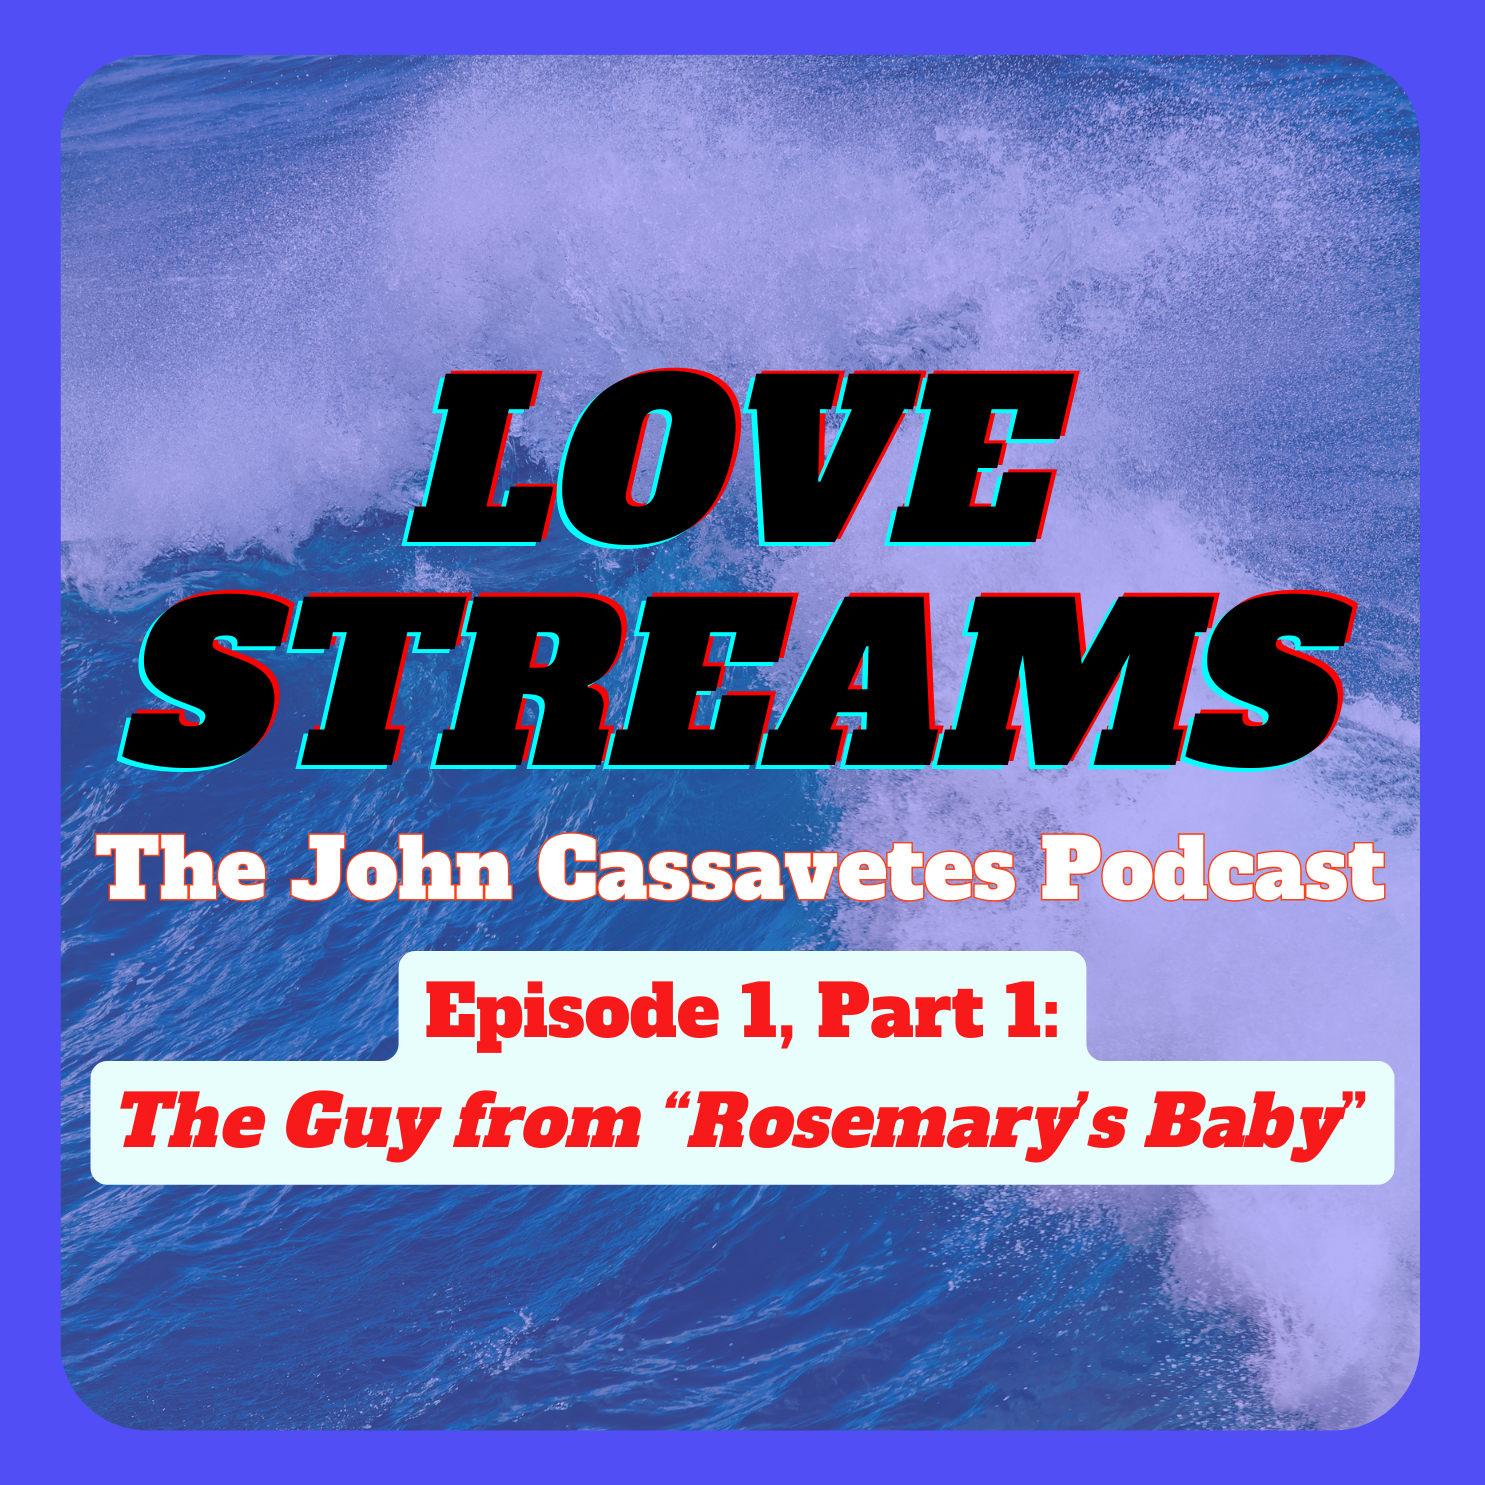 Episode 1, Part 1: The Guy From "Rosemary's Baby"